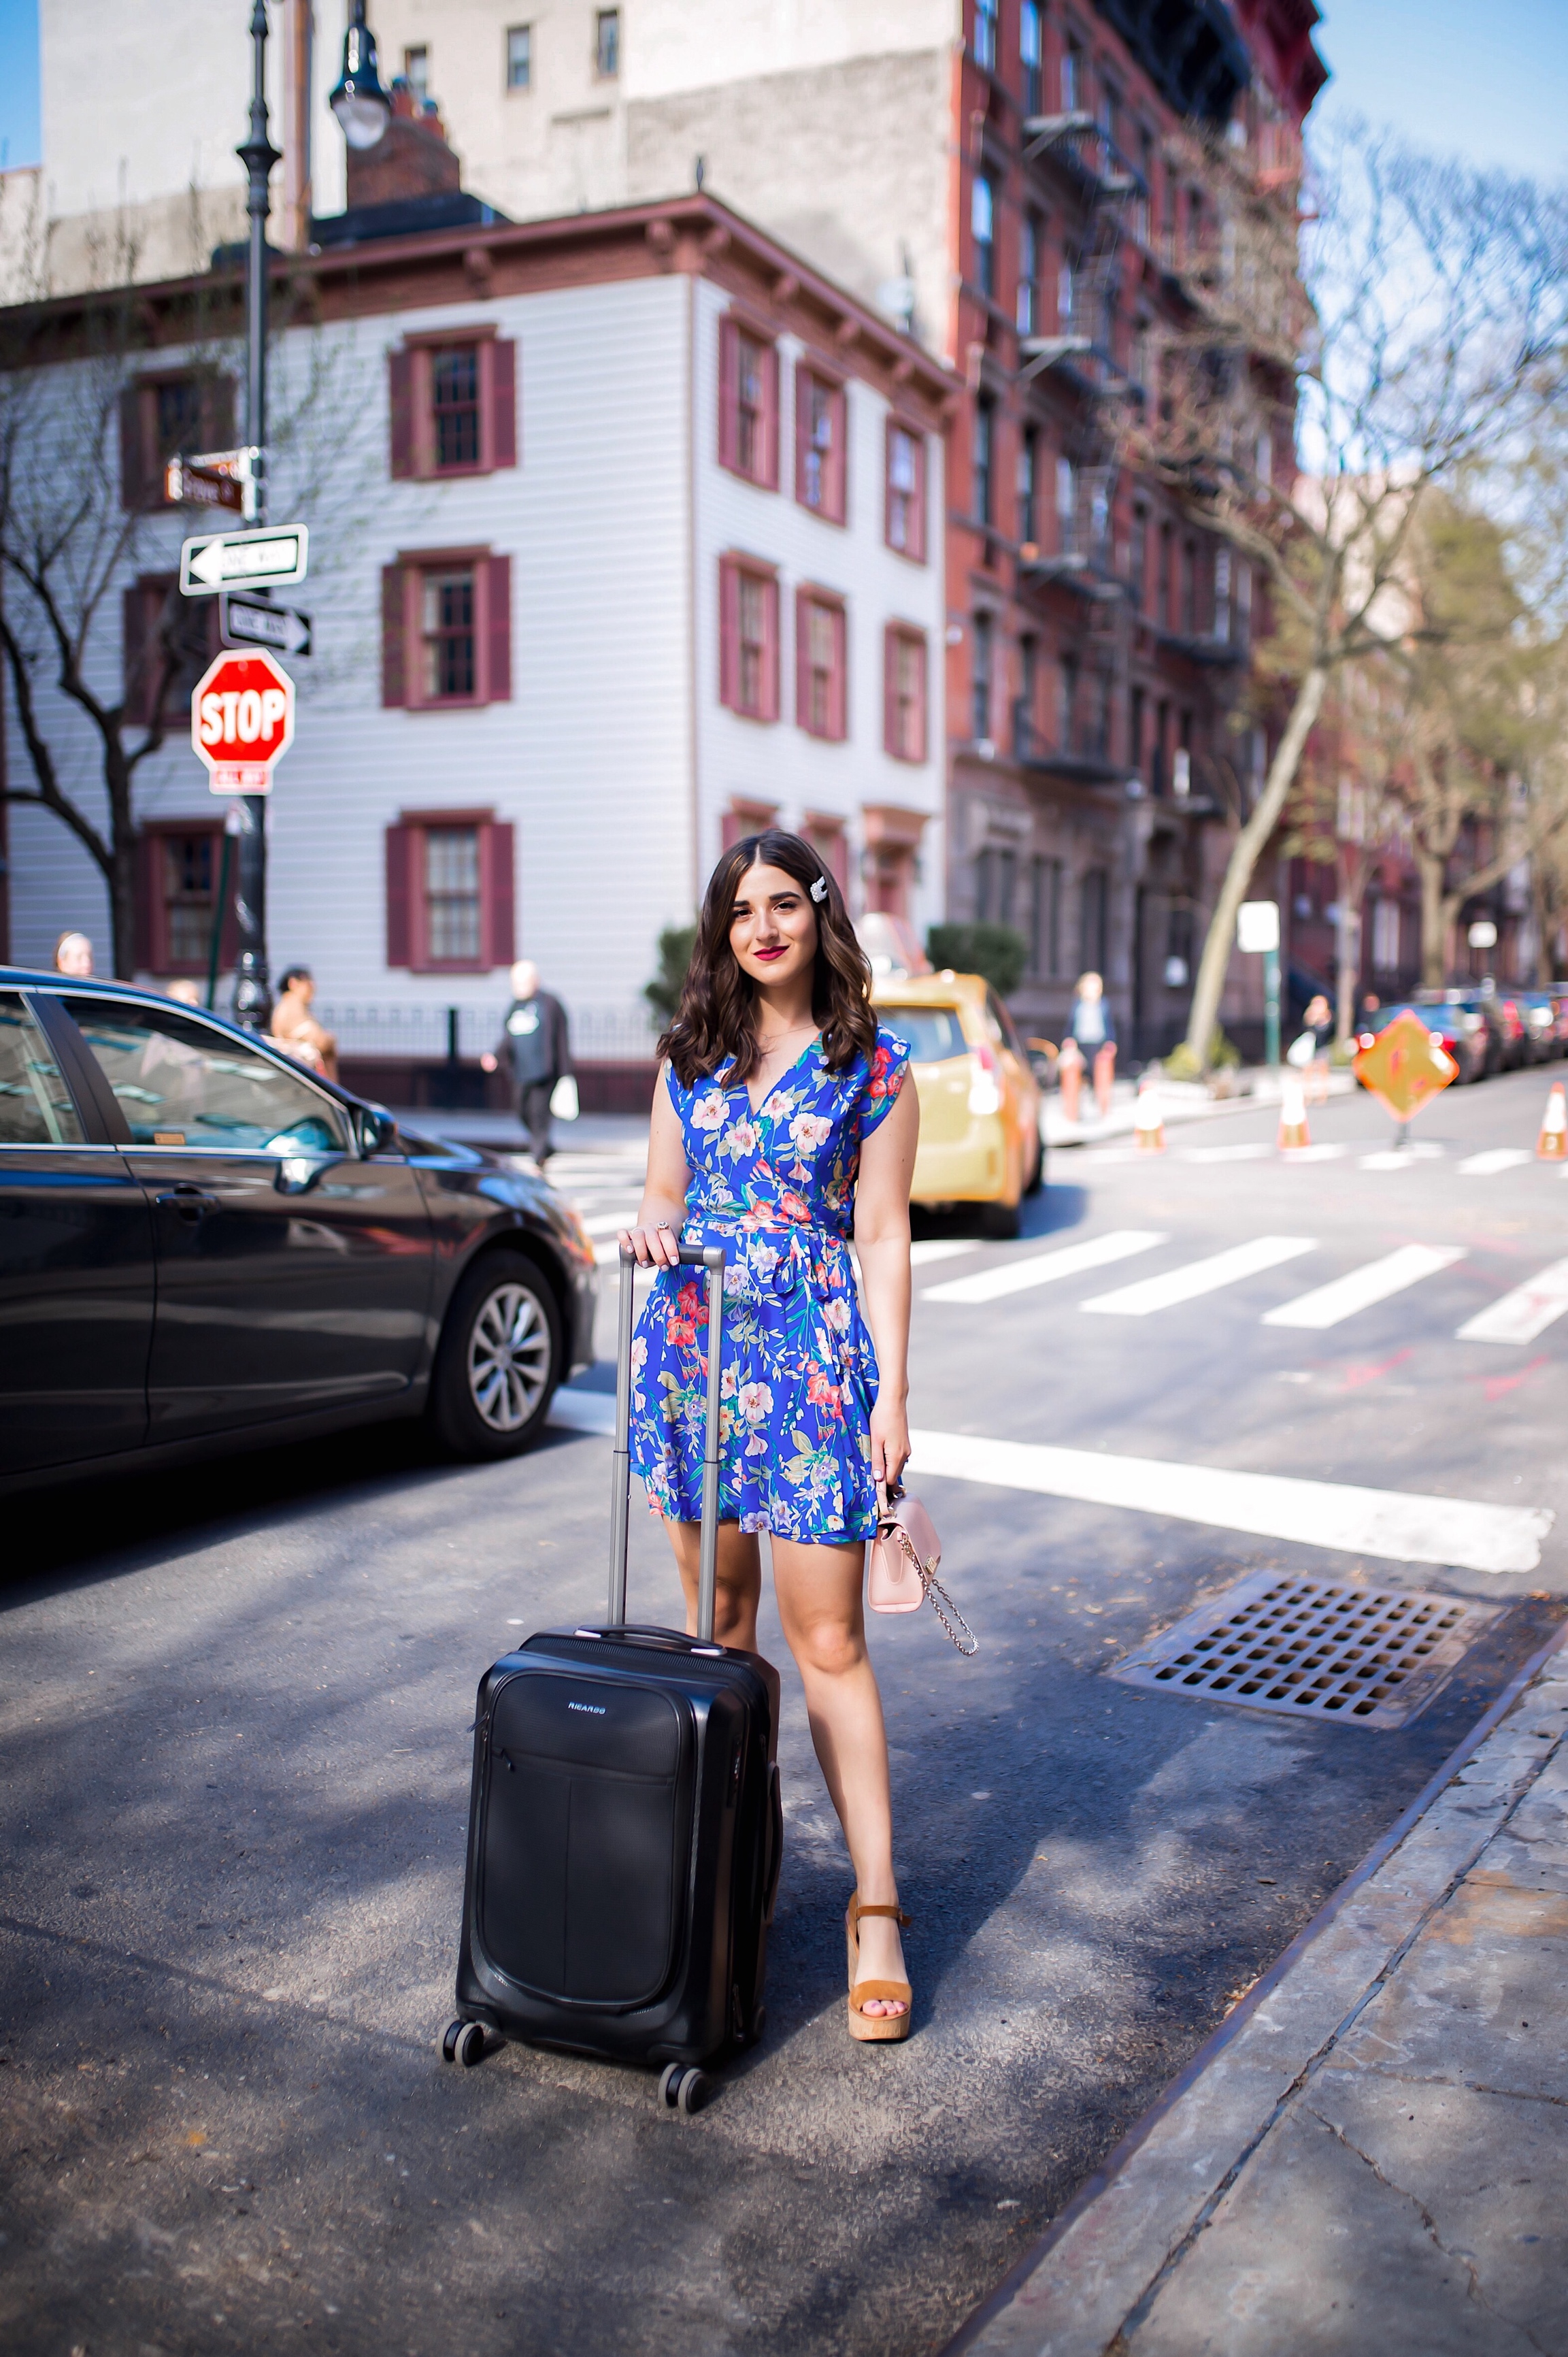 How Ricardo Luggage Keeps Me Organized The Cupertino Collection Esther Santer Fashion Blog NYC Street Style Blogger Outfit OOTD Trendy Shopping Girl Travel Honeymoon Trip Vacation Europe Pack Packing Best Black Front Pocket Hard Case Carry On Suitcase.JPG